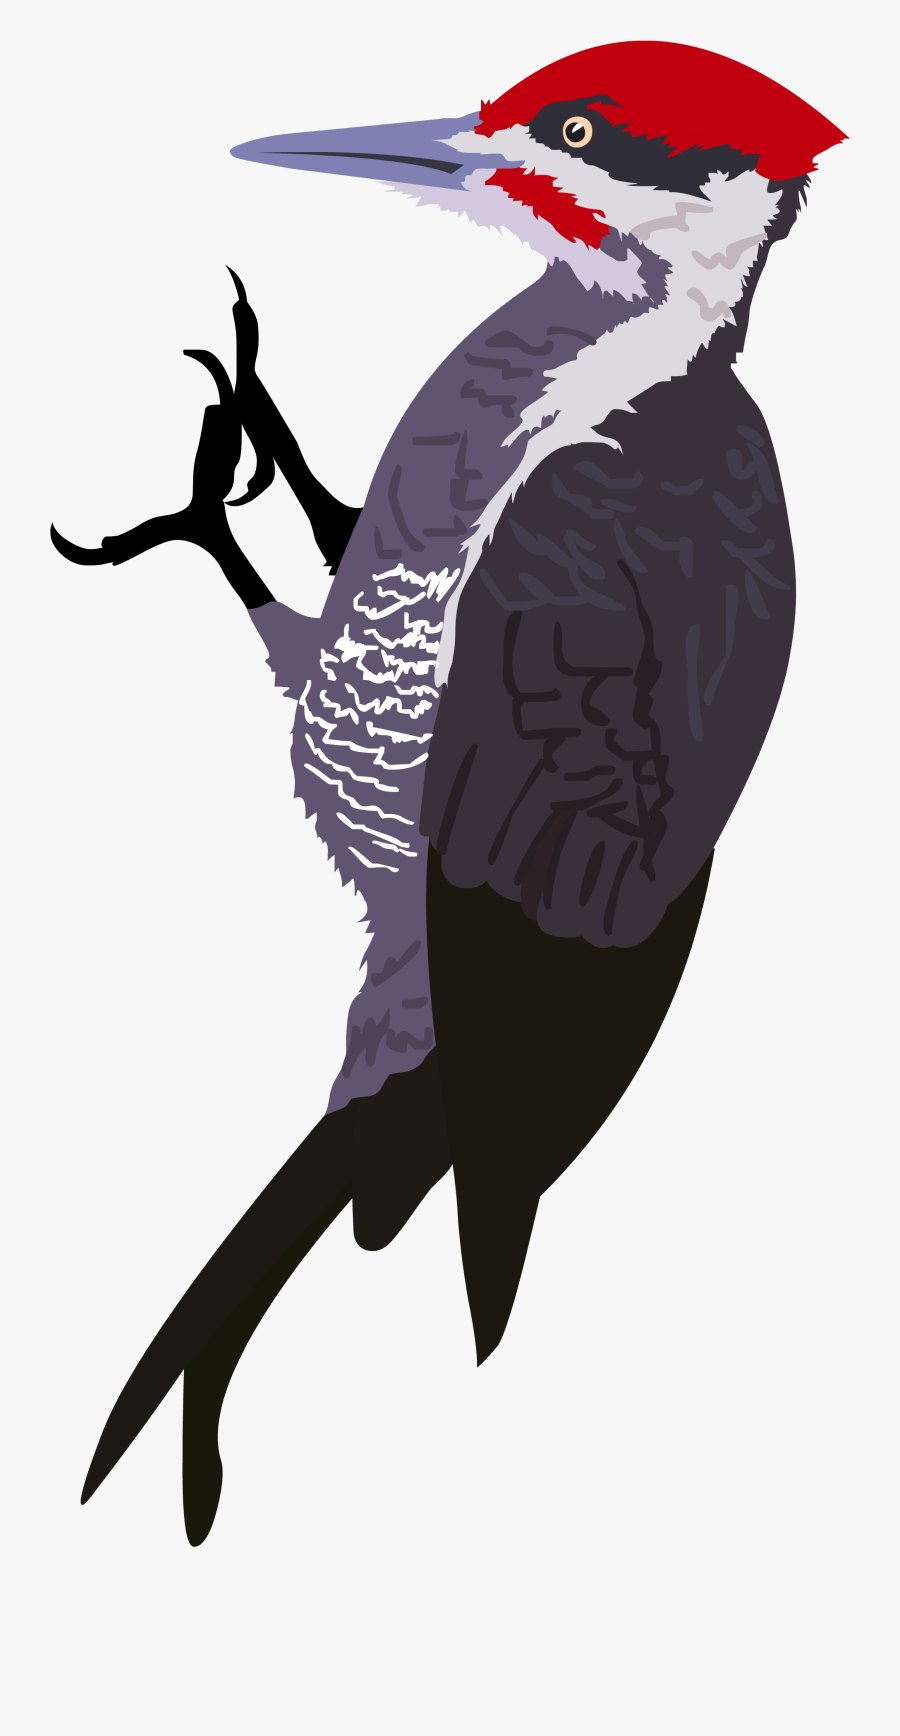 Woodpecker,red Headed Woodpecker,ivory-billed Woodpecker,illustration - Transparent Woodpecker Png, Transparent Clipart